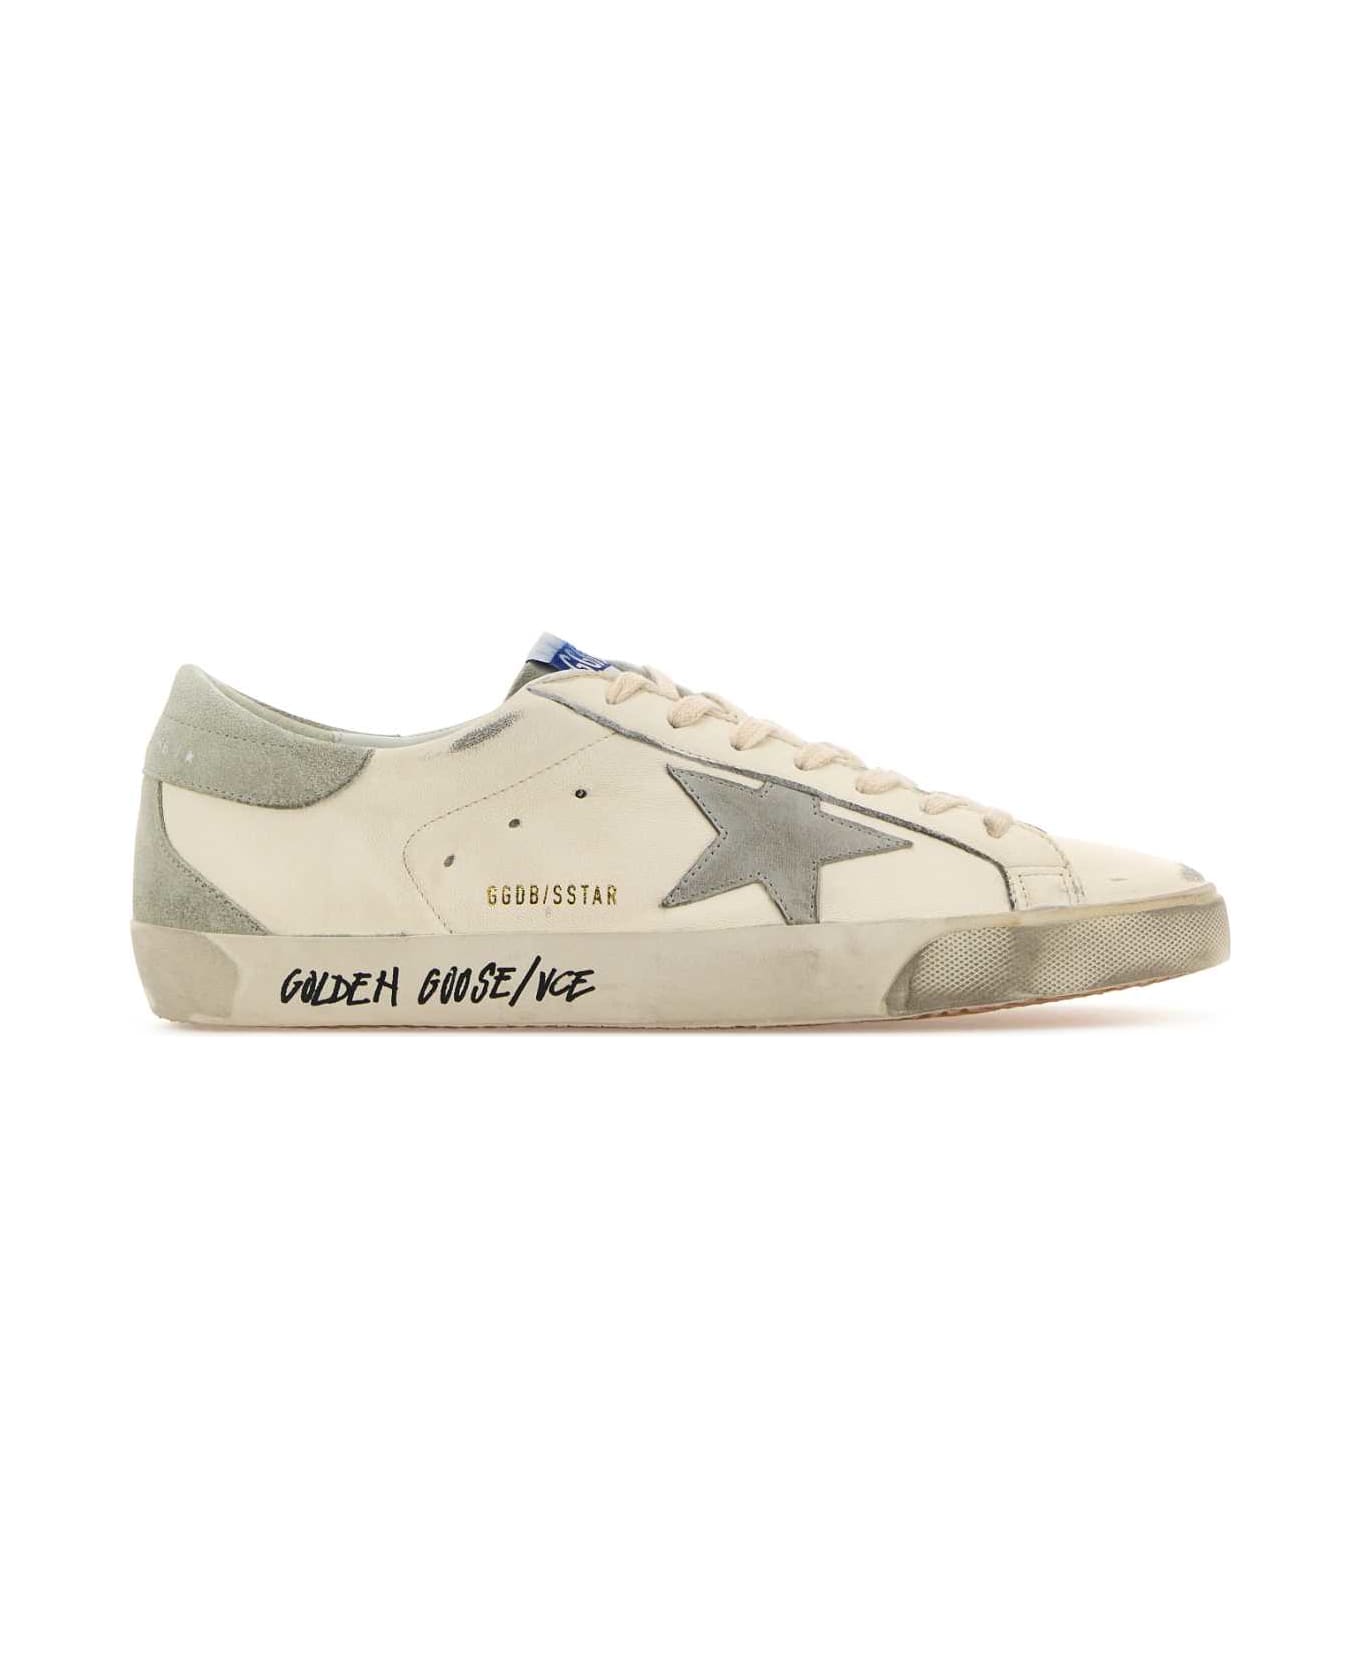 Golden Goose Multicolor Leather Super Star Sneakers - WHITEICEGREY